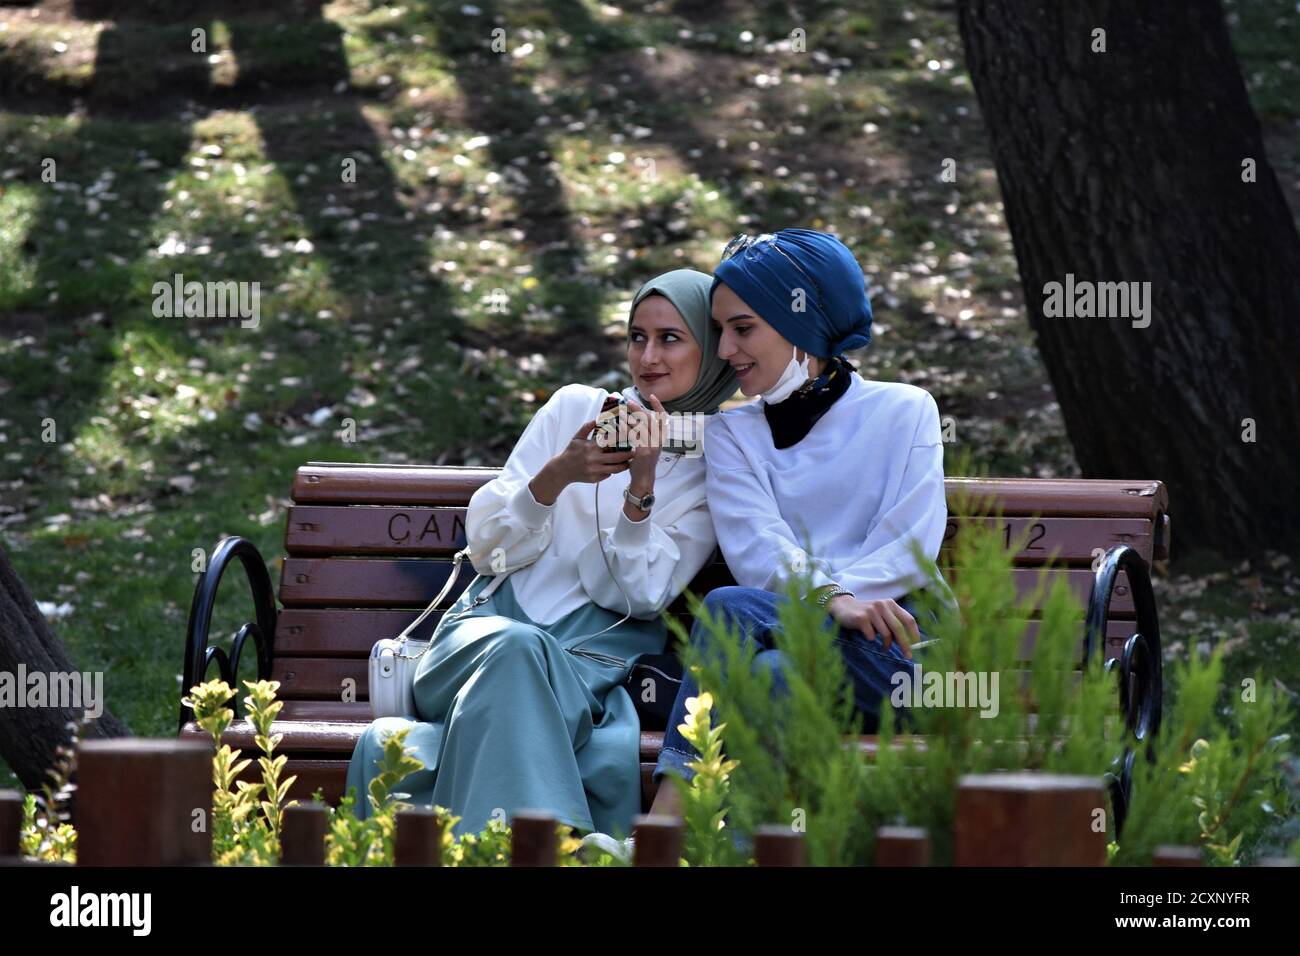 Ankara, Turkey. 1st Oct, 2020. Two young women enjoy a nice weather in Kugulu Park amid the coronavirus (COVID-19) outbreak. Turkish Minister of Health Fahrettin Koca admitted on September 30 that asymptomatic cases of the coronavirus are deliberately excluded from daily reports. The minister's statement came after the revelation of a document showing nearly 20 times more cases than the official daily figures. Credit: Altan Gocher/ZUMA Wire/Alamy Live News Stock Photo